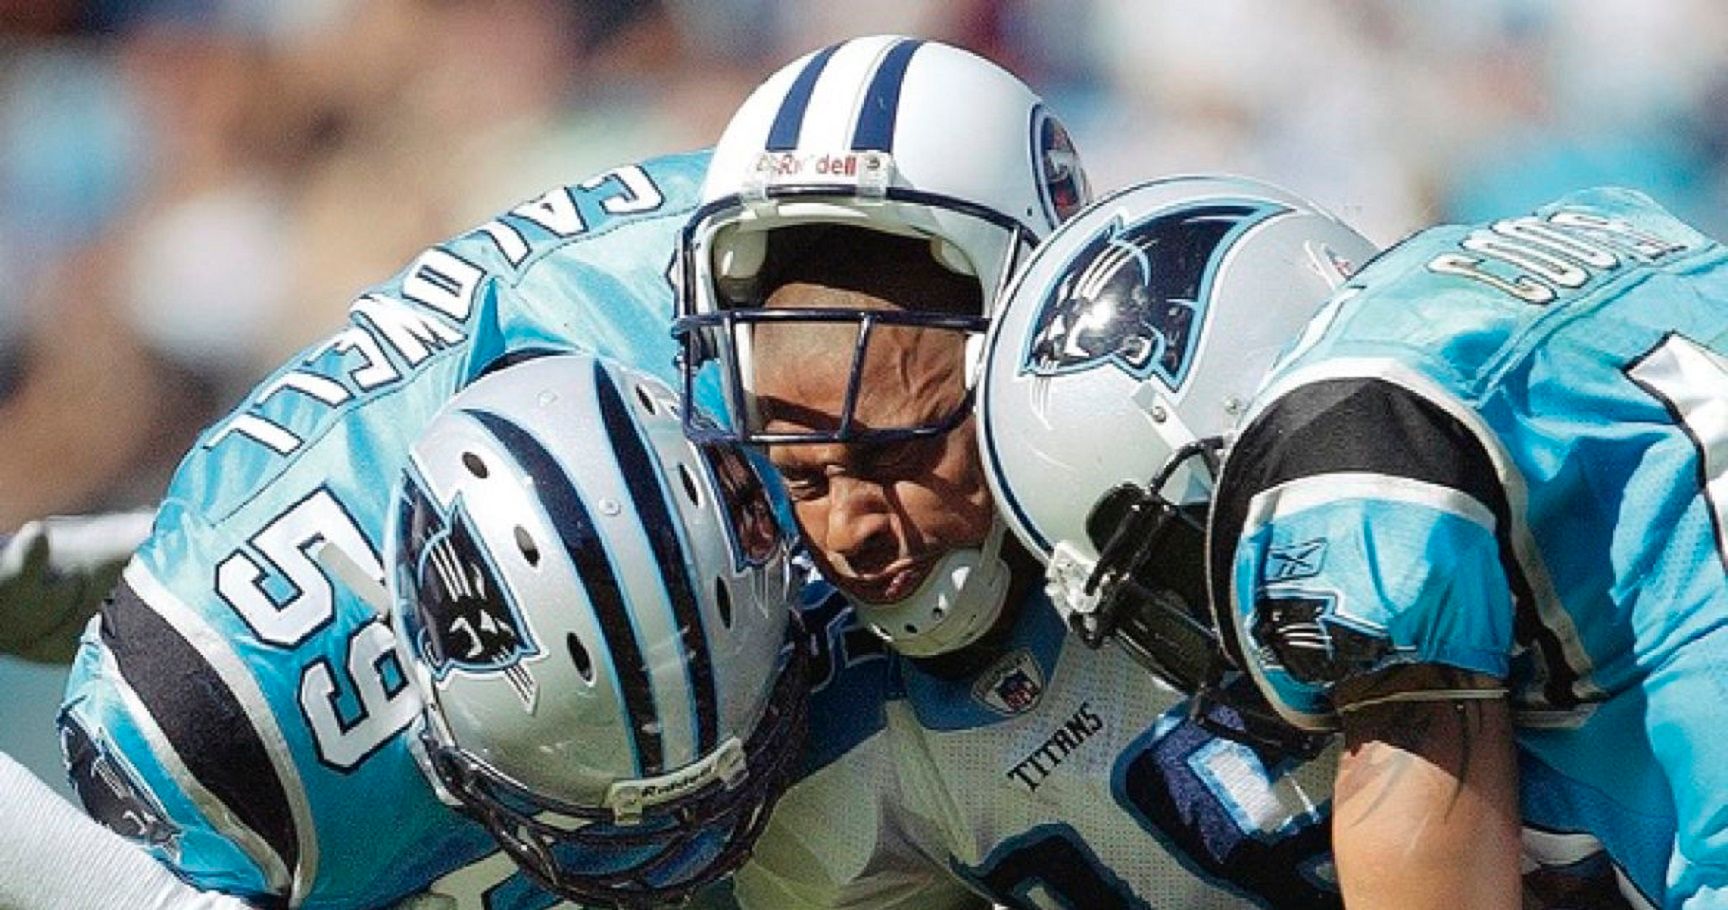 15 Shocking Statistics About Concussions in the NFL